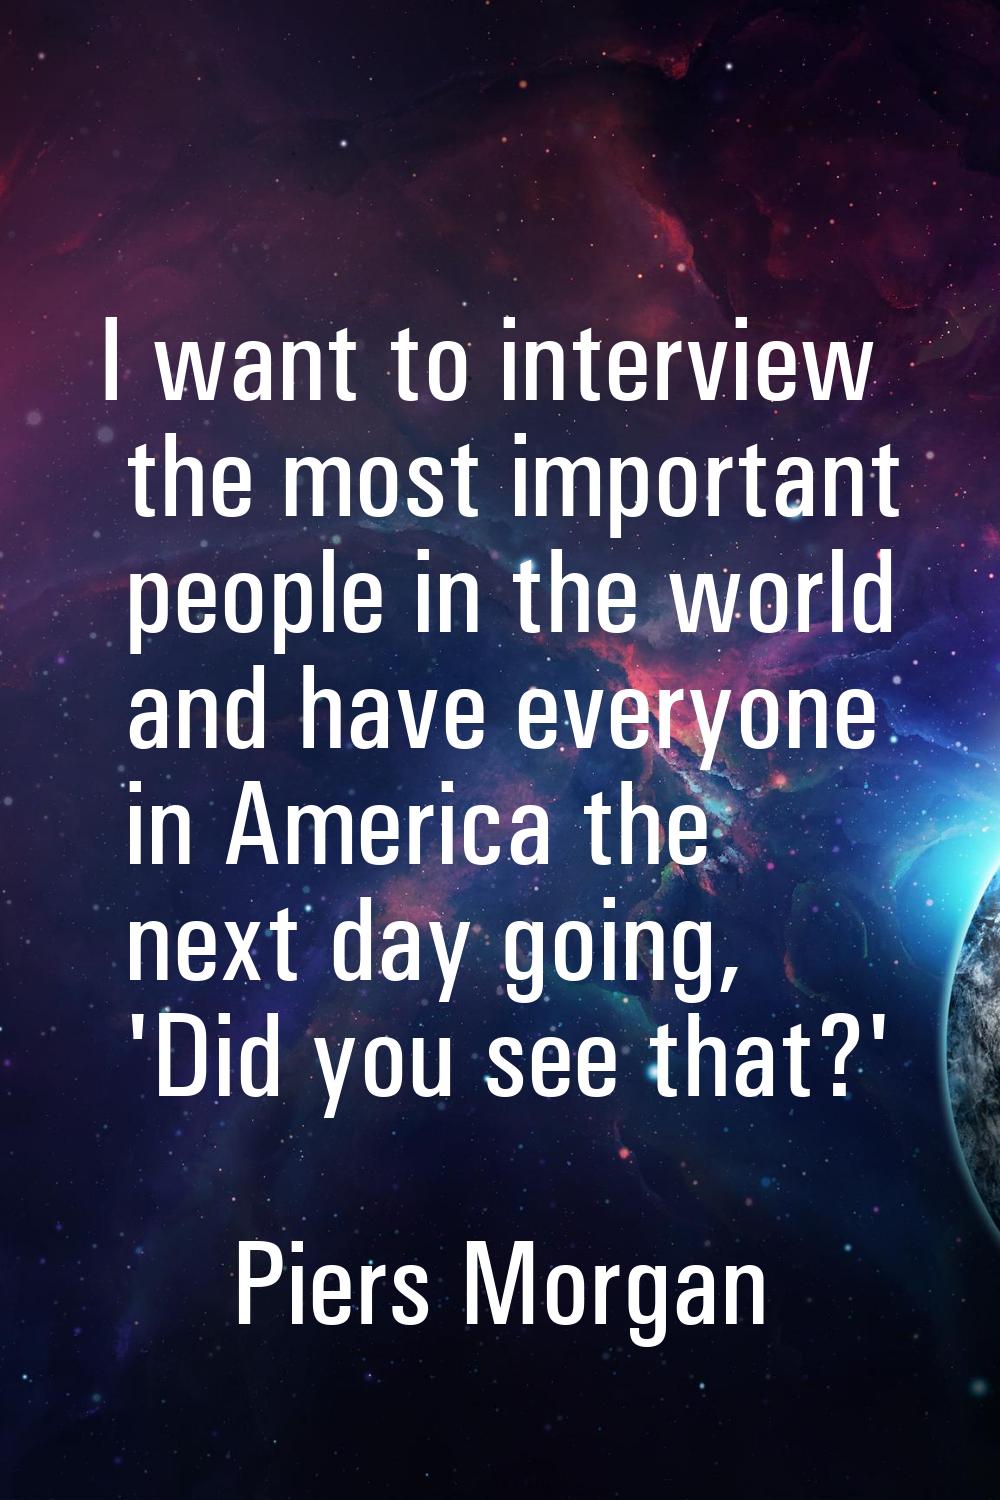 I want to interview the most important people in the world and have everyone in America the next da